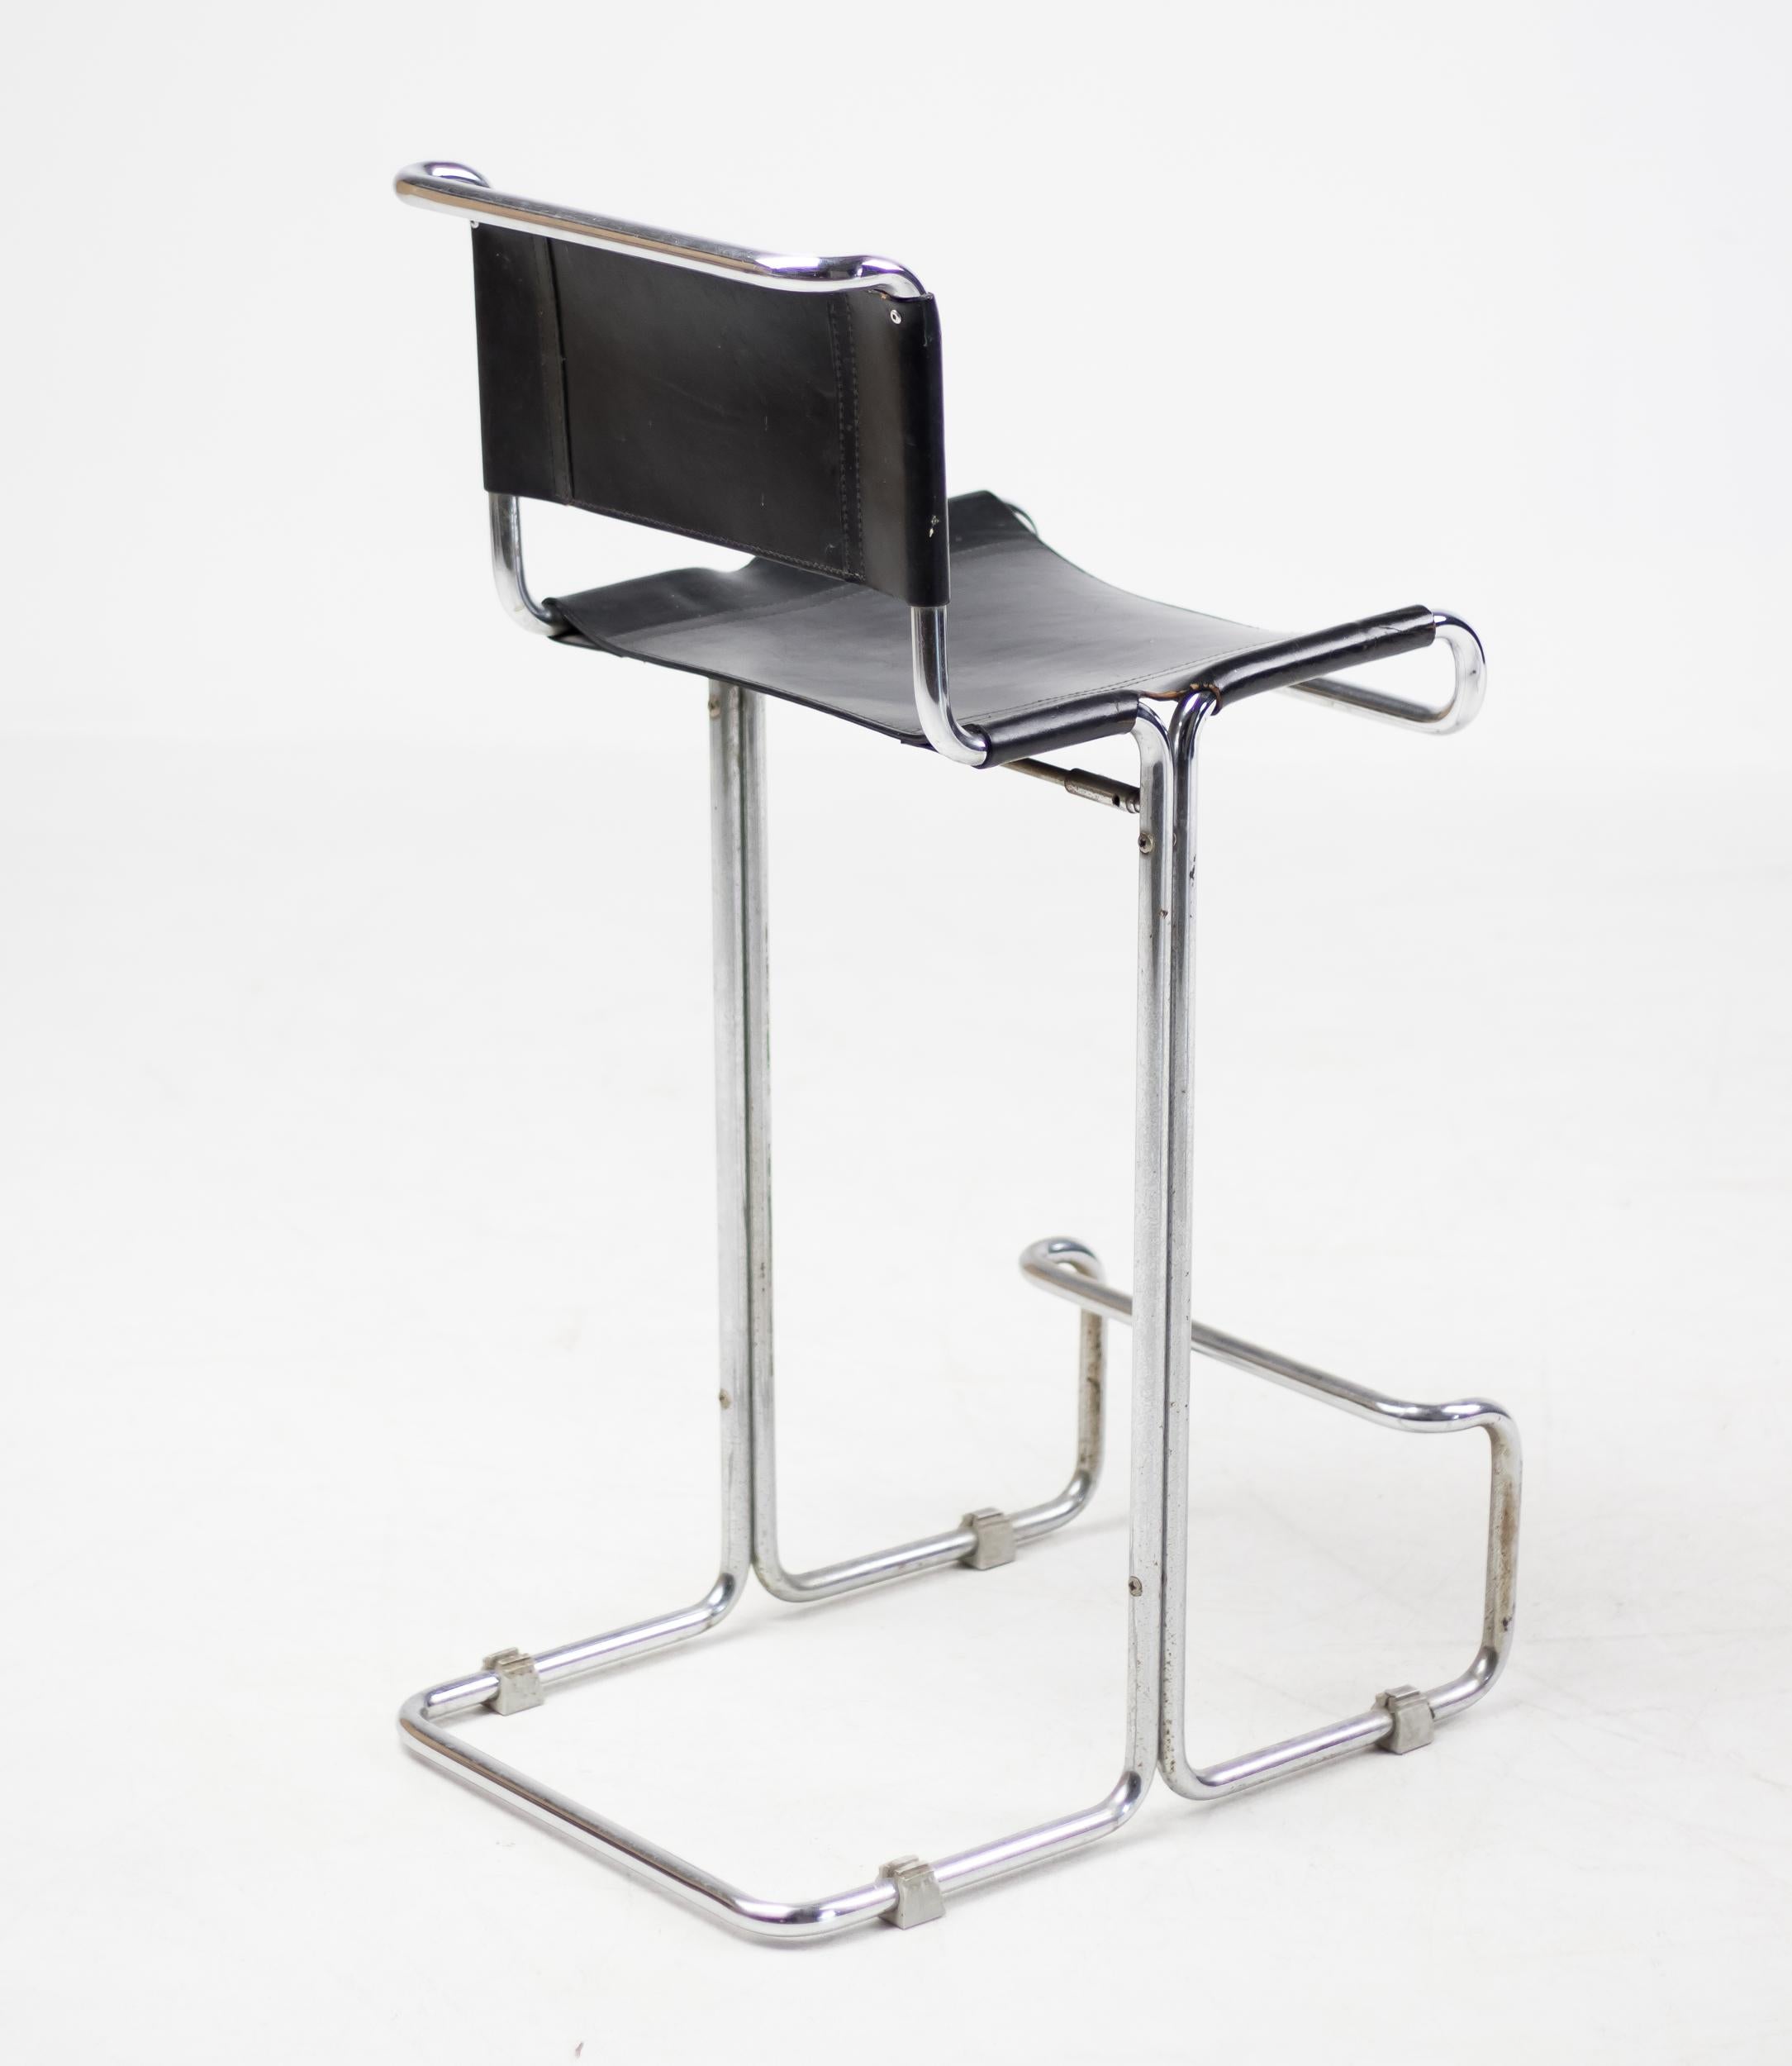 Unique leather and tubular chromed steel bar stool.
All original black saddle leather sling seat and back.
Great patina, very comfortable.